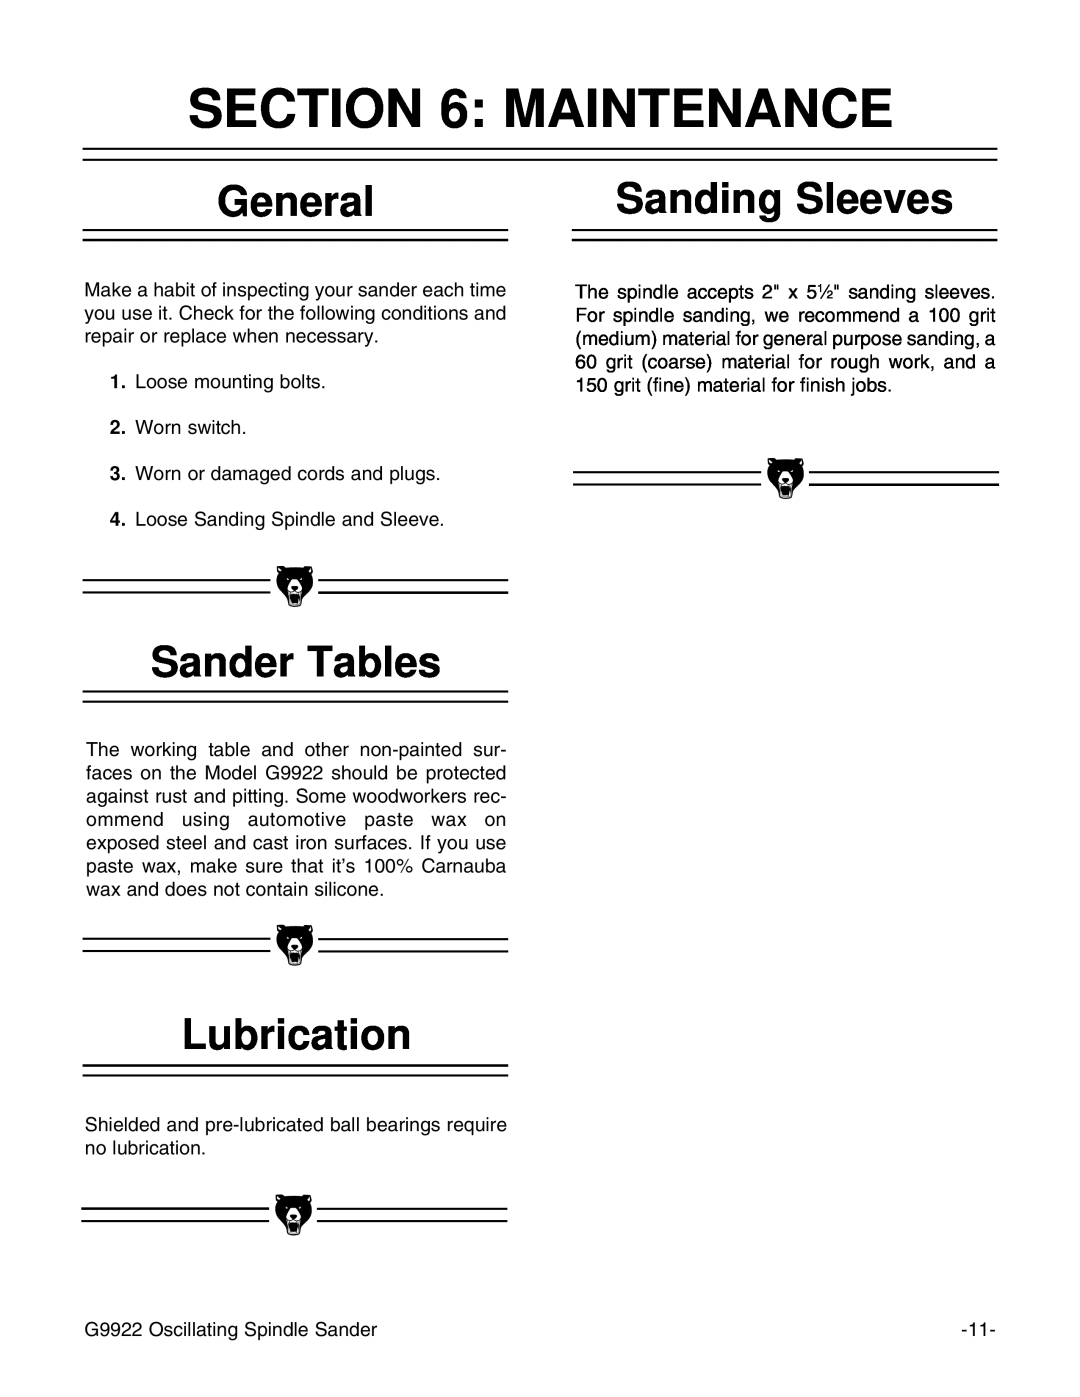 Grizzly G9922 instruction manual Maintenance, General, Sander Tables, Lubrication, Sanding Sleeves 